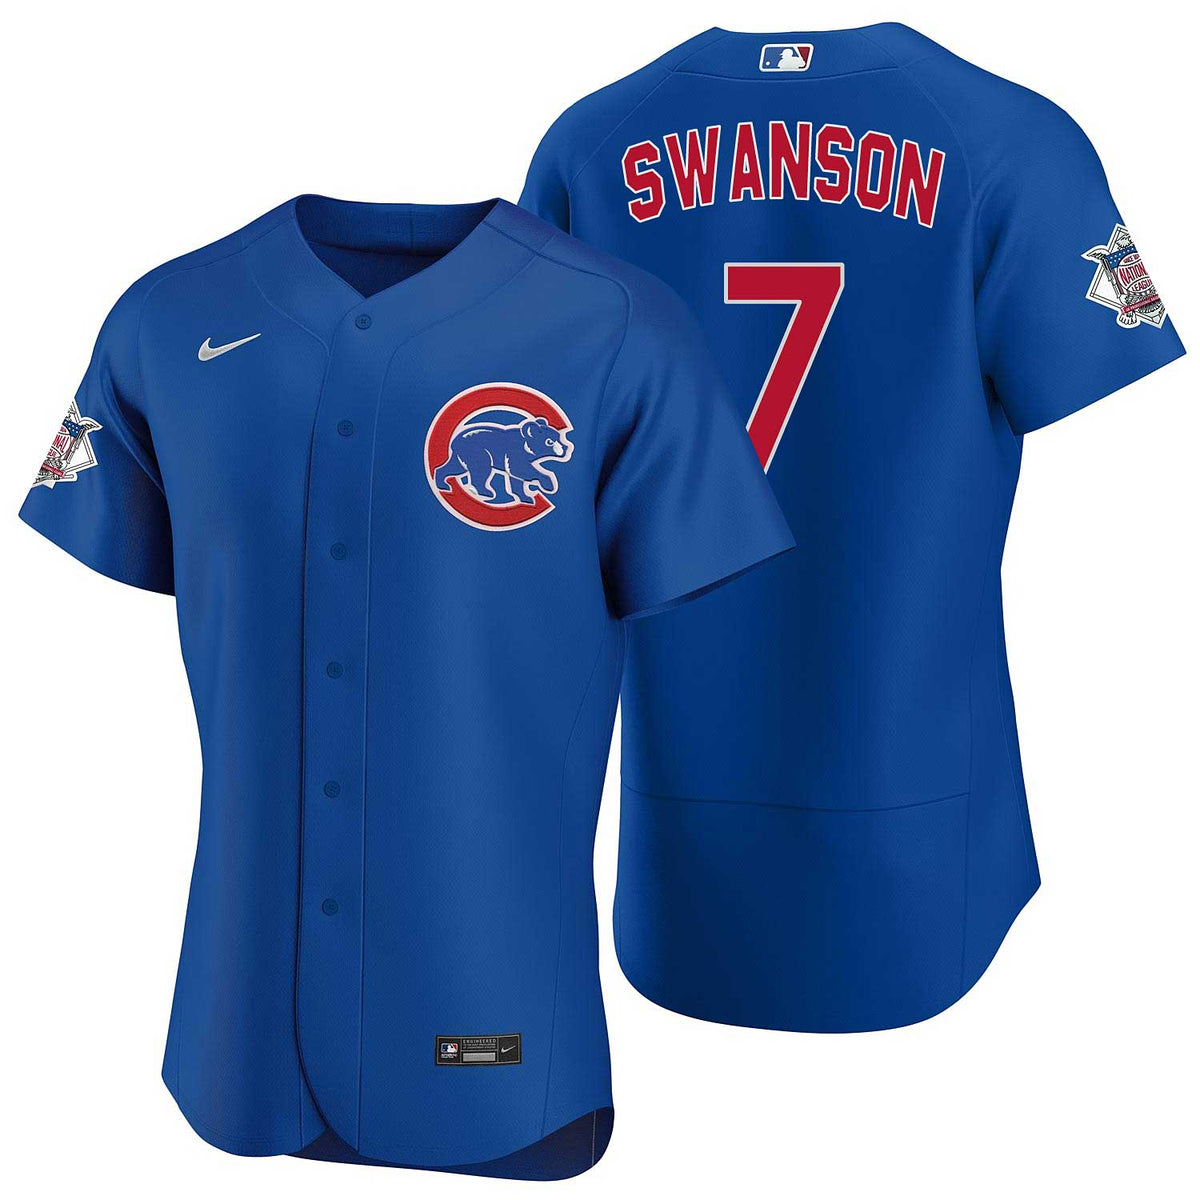 Dansby Swanson Chicago Cubs Road Authentic Jersey by NIKE